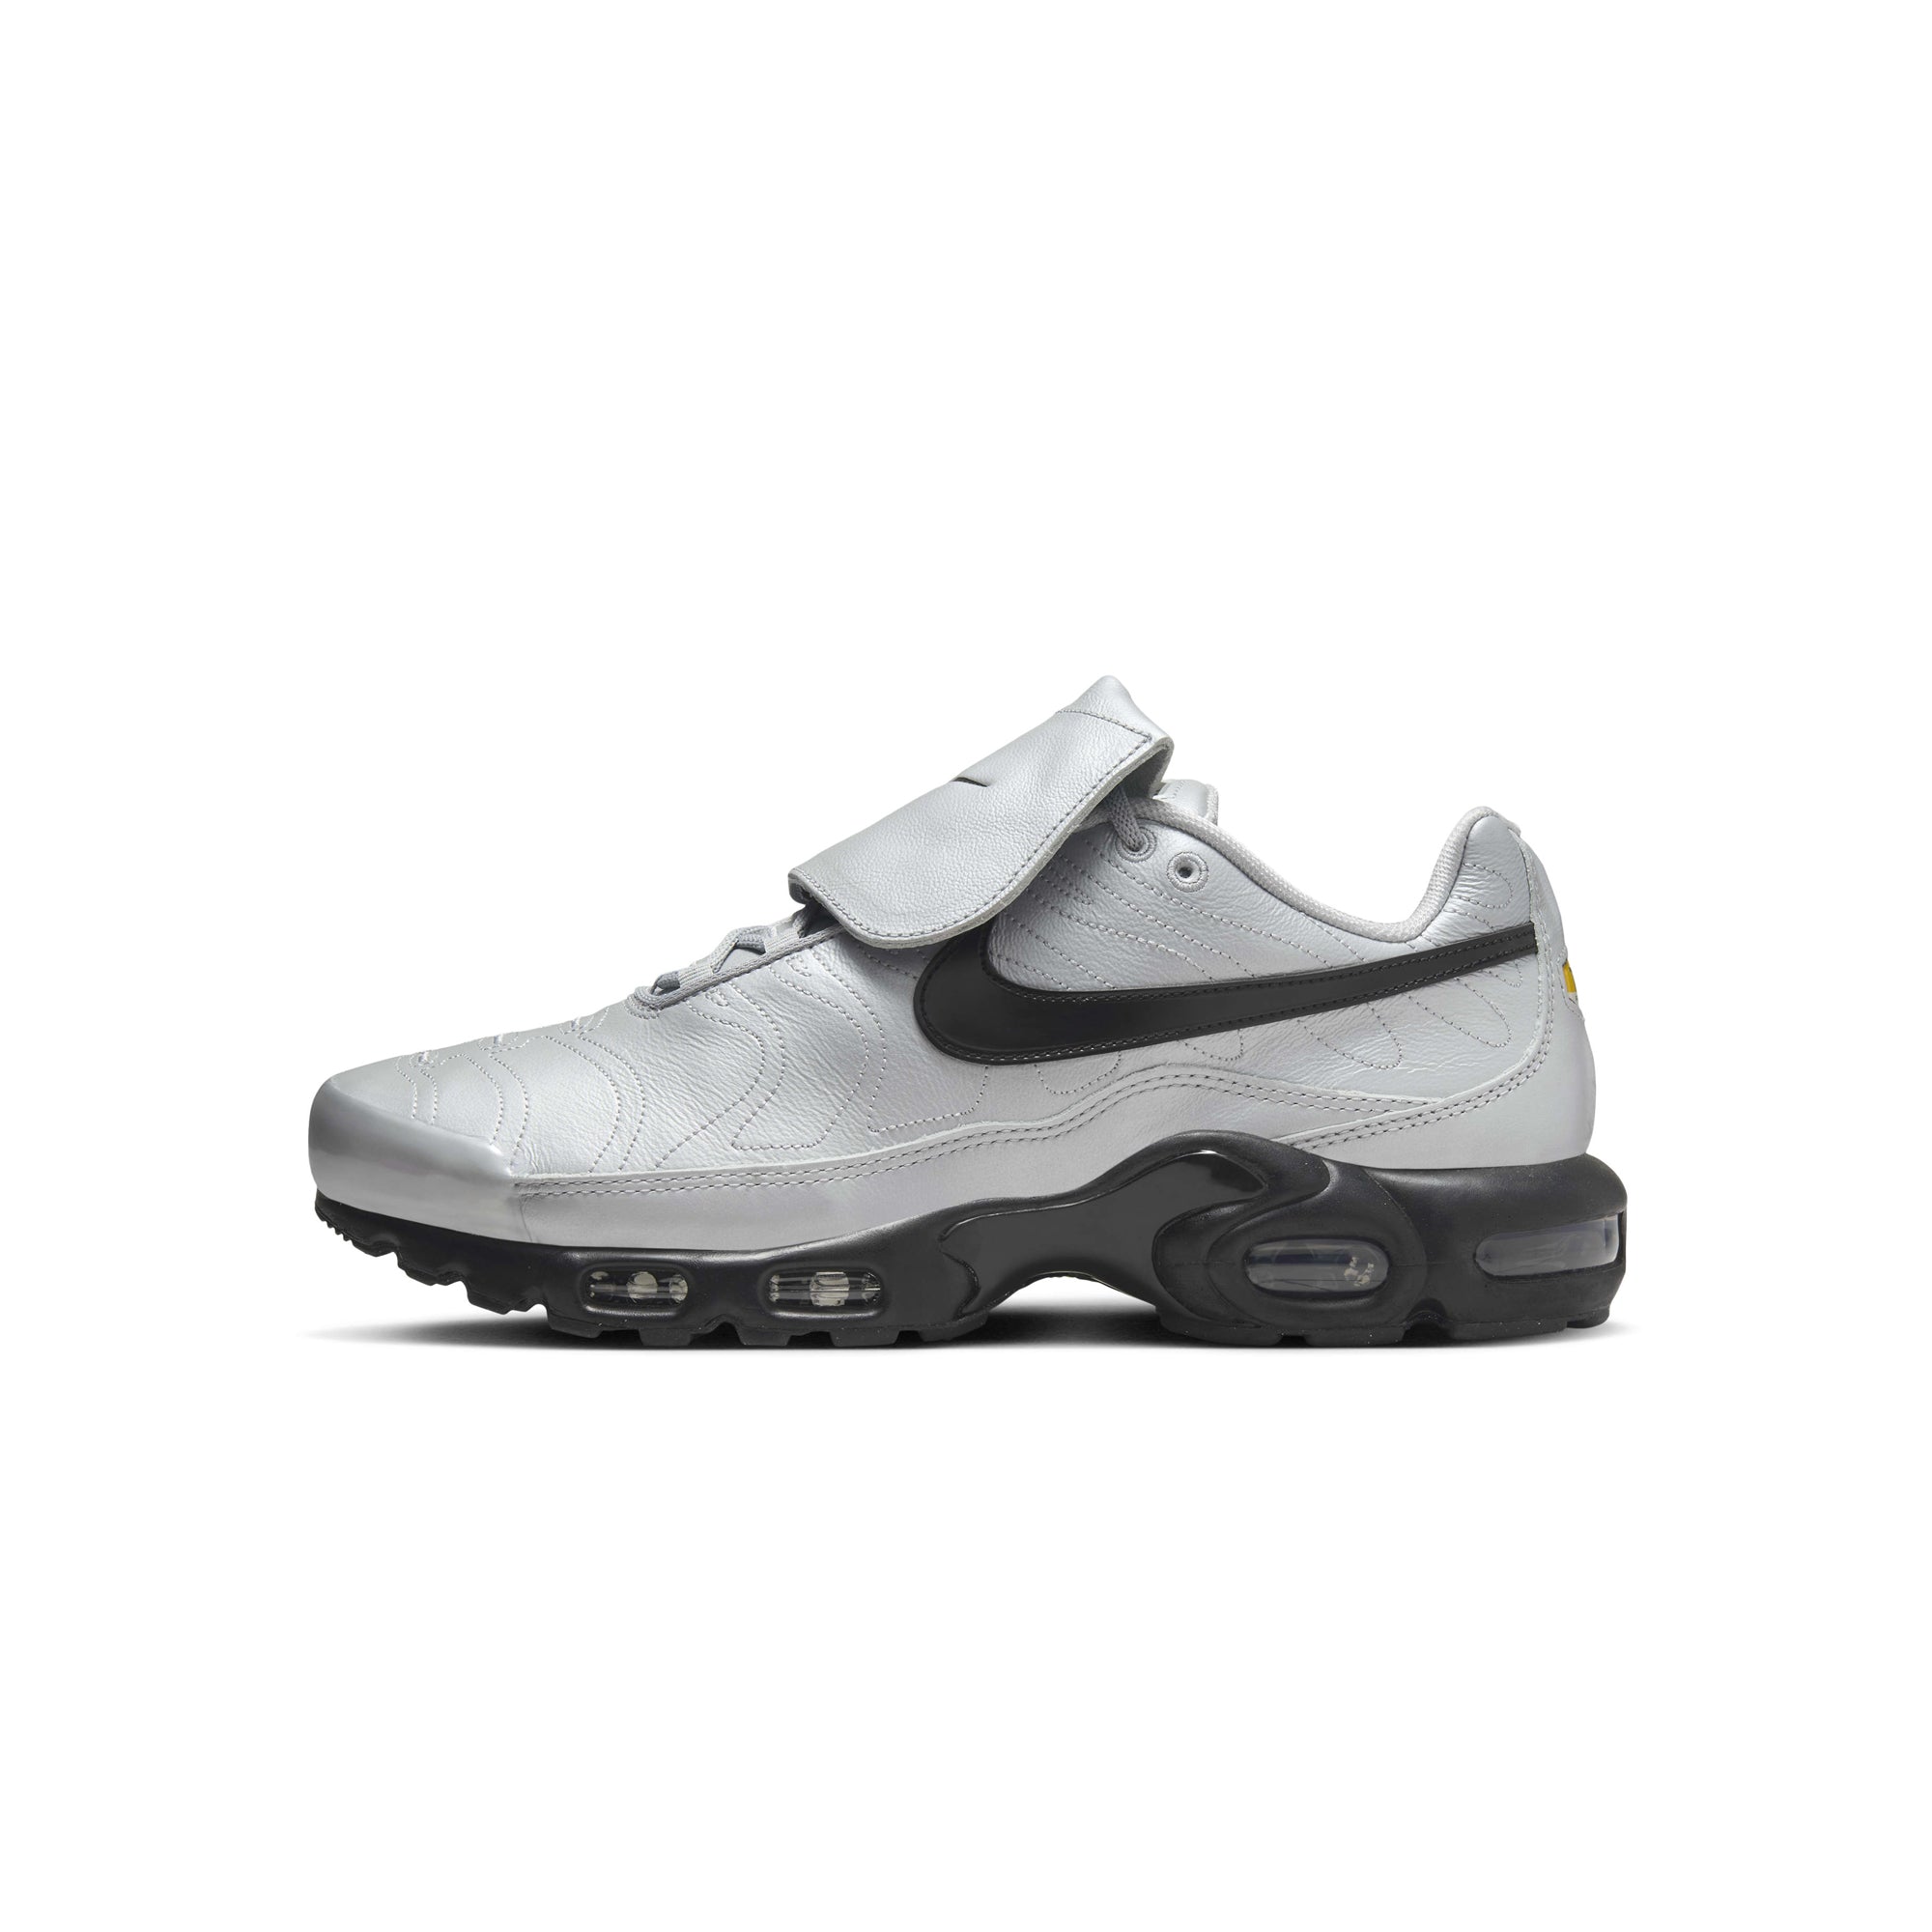 Nike Mens Air Max Plus Tiempo "Wolf Grey" Shoes card image